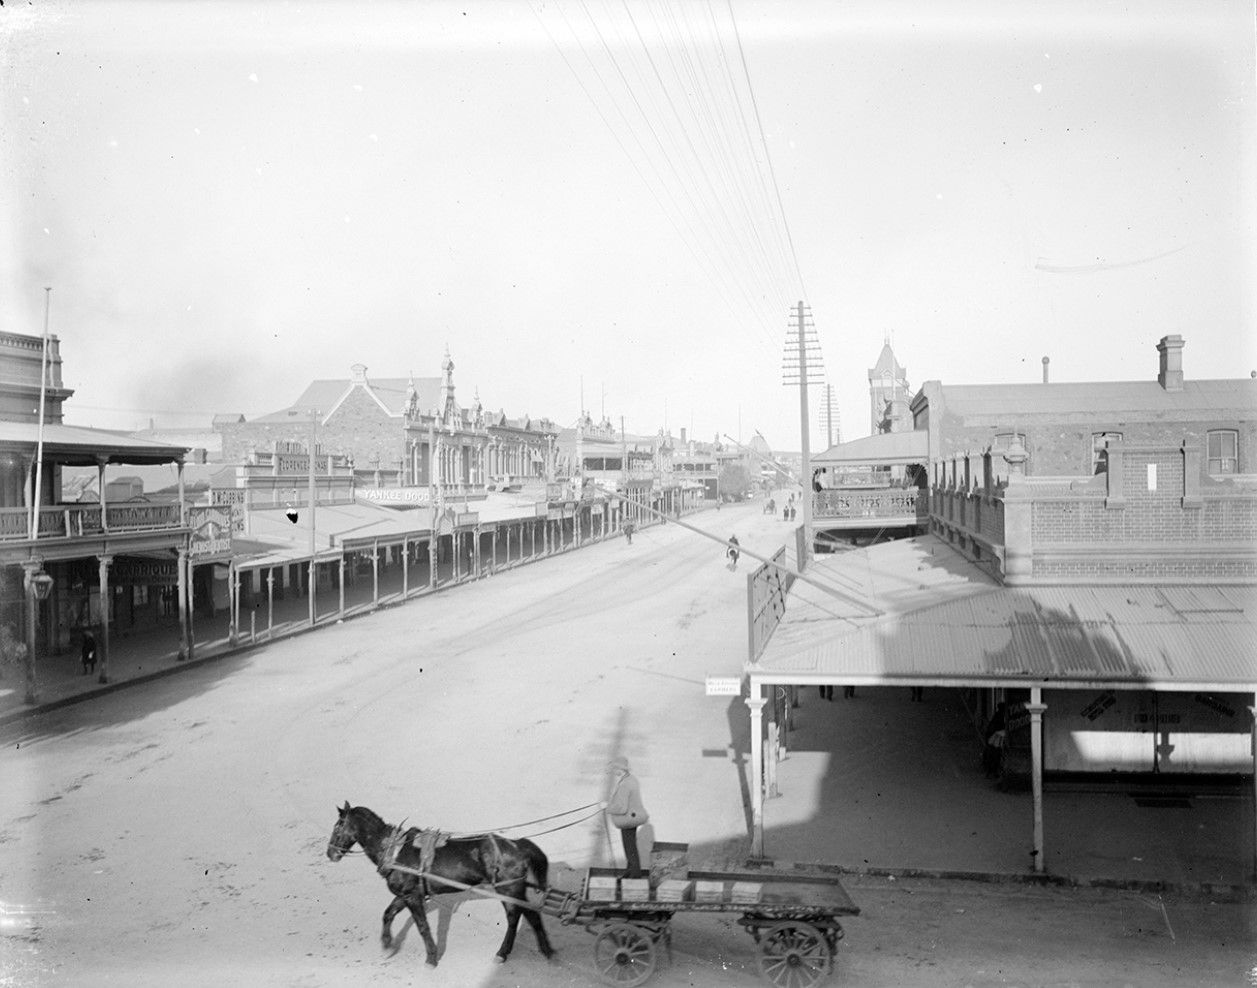 A horse and cart turn onto the main street